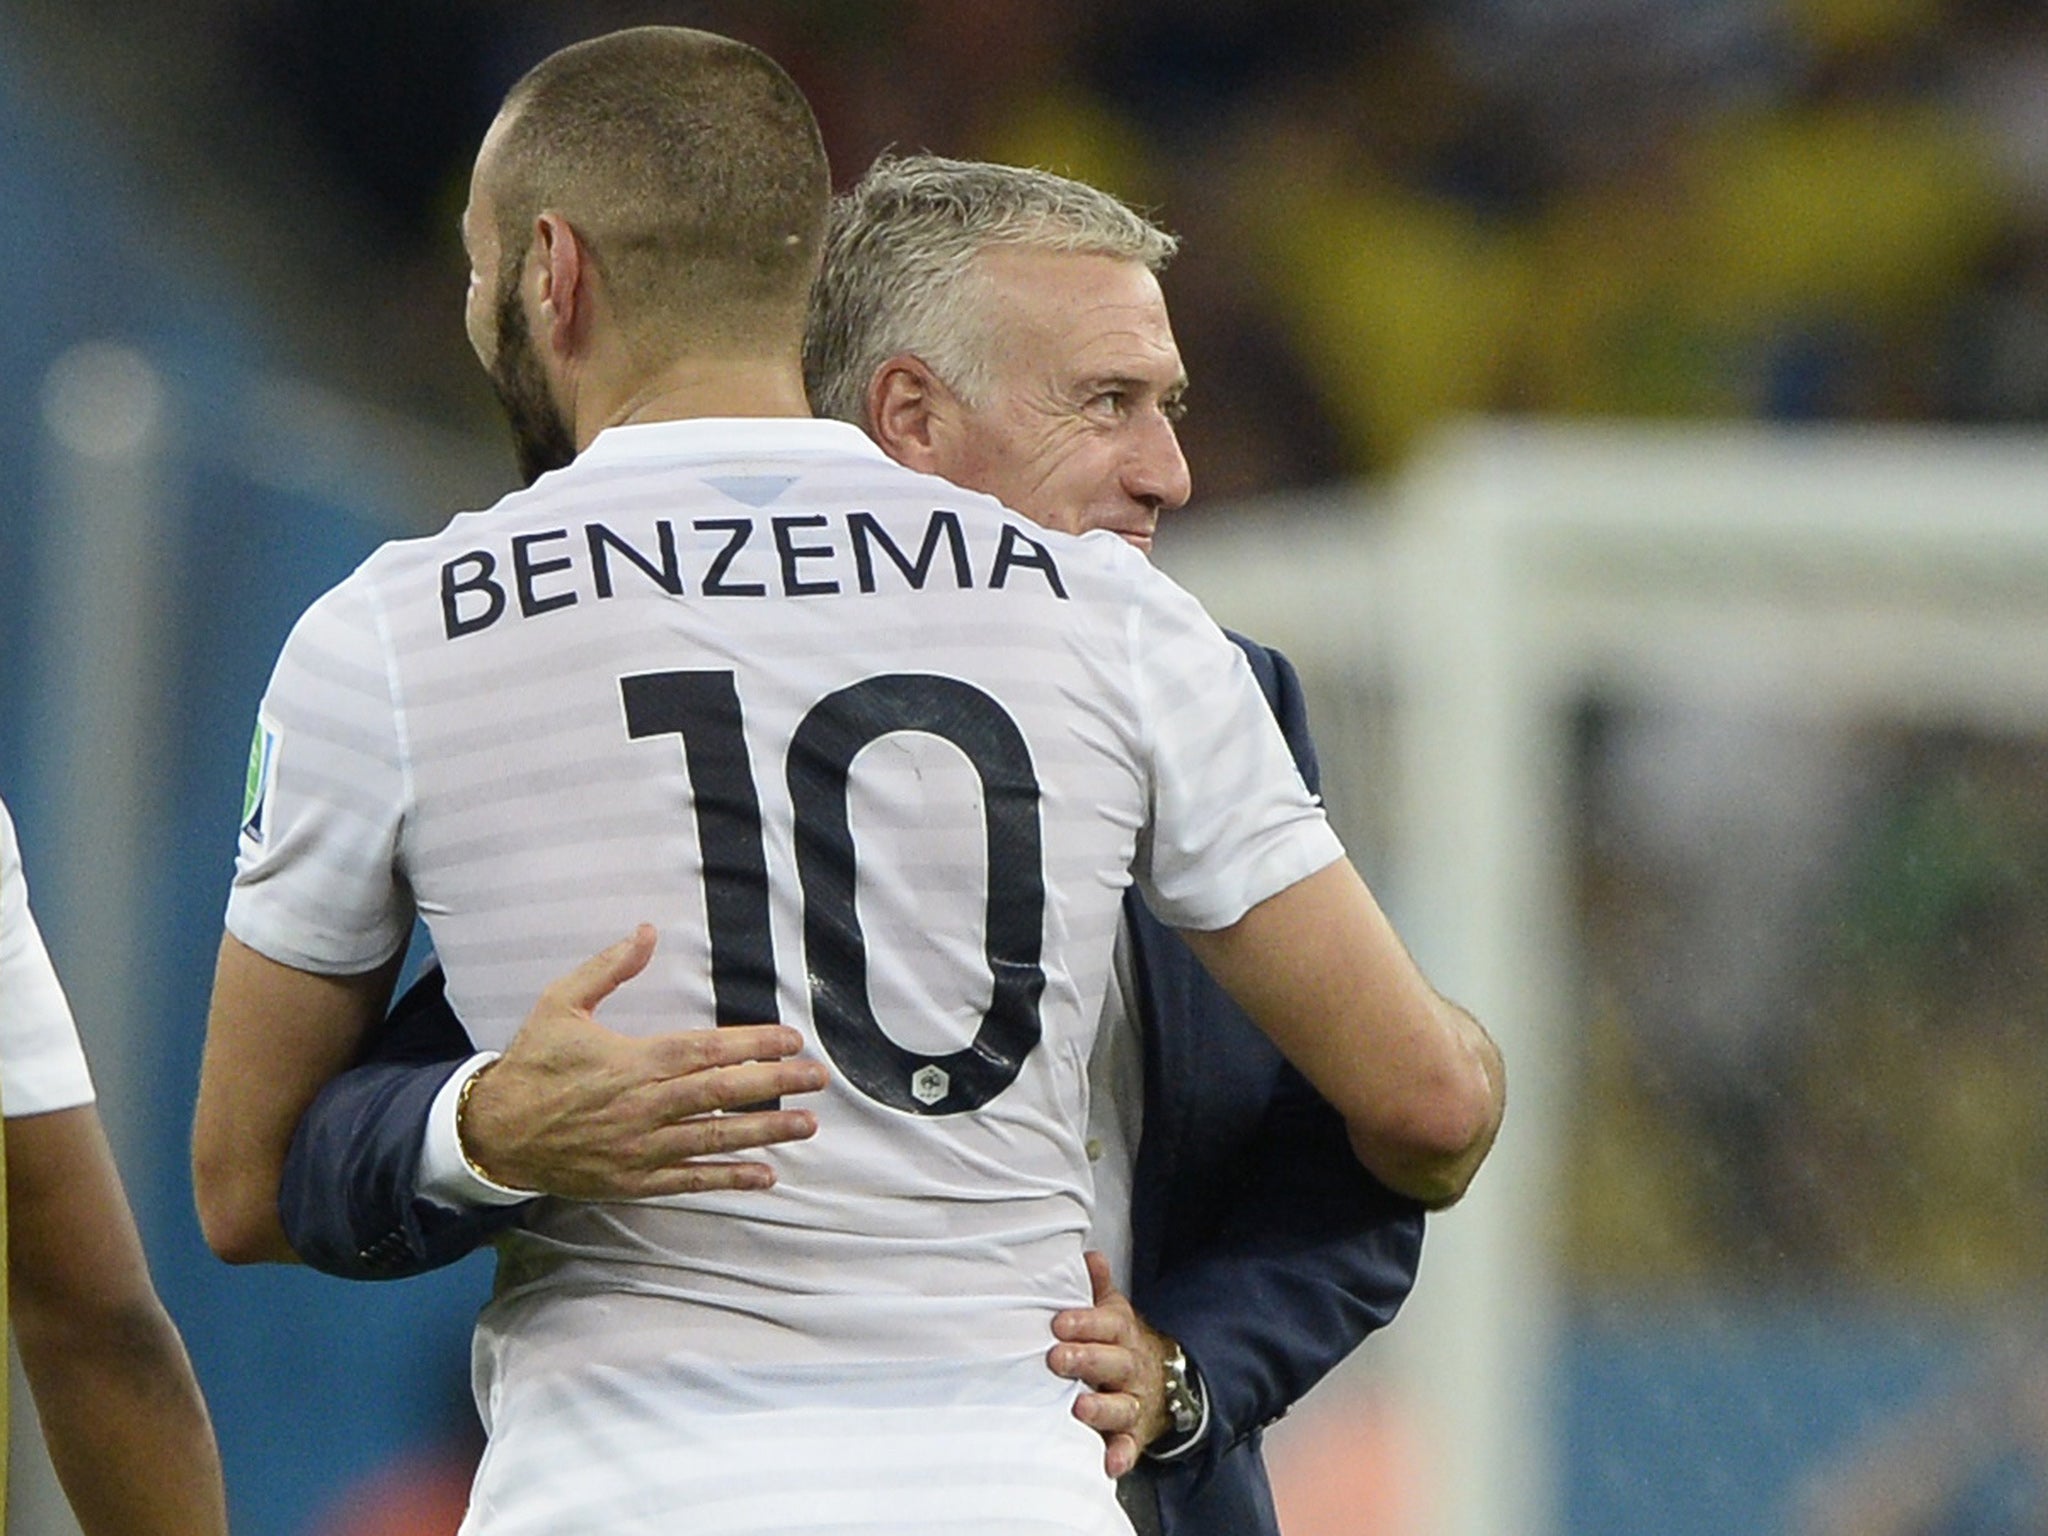 Benzema and Deschamps, pictured during the 2014 World Cup in Brazil